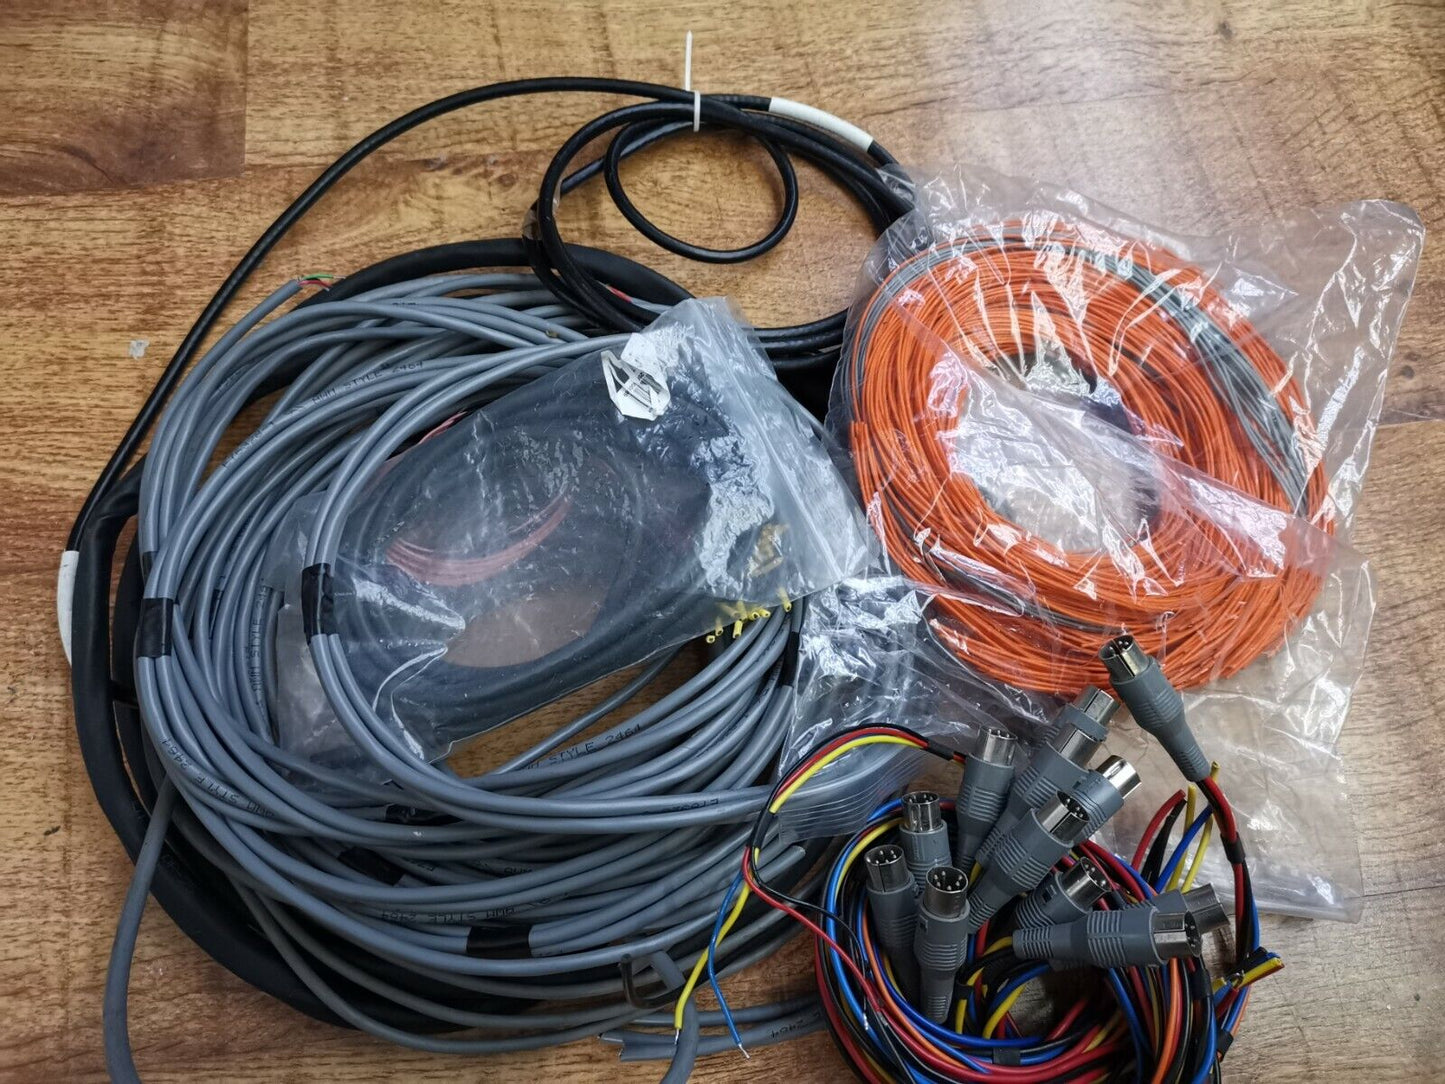 Military Avionics And Other Type Of Wires And Cables